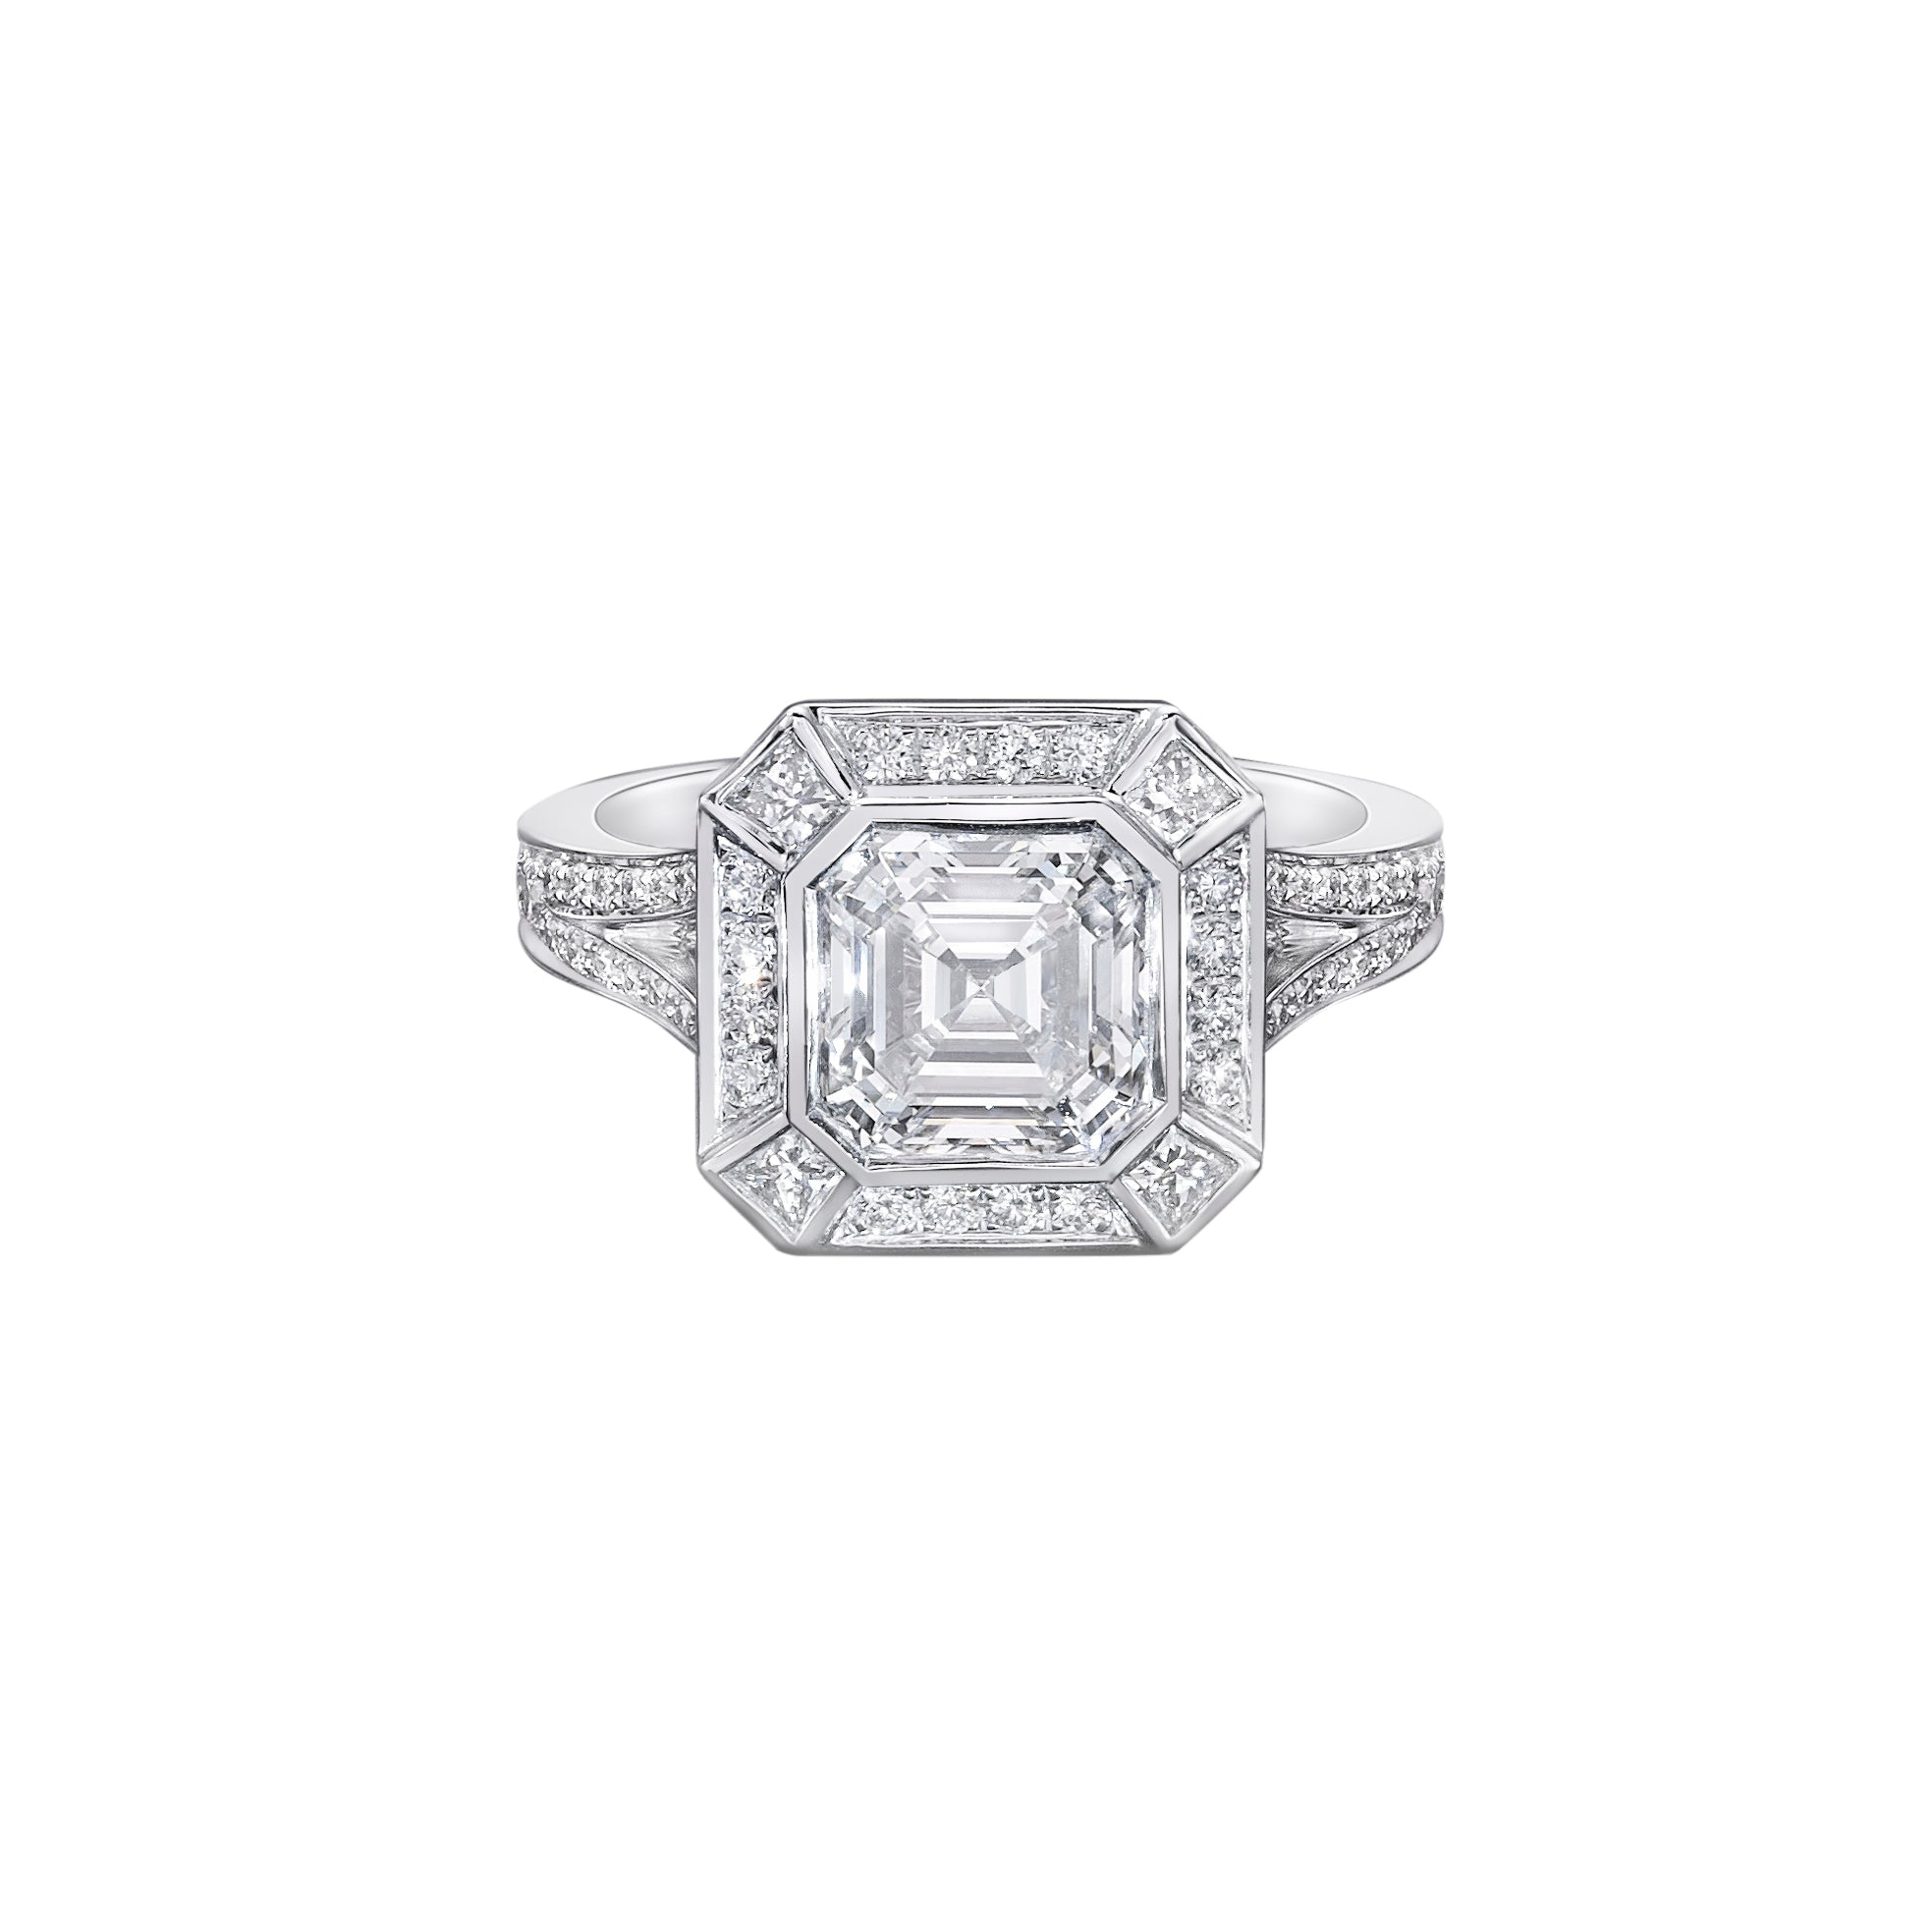 Asher Cut Art Deco Style Ring - 2.79ct TW